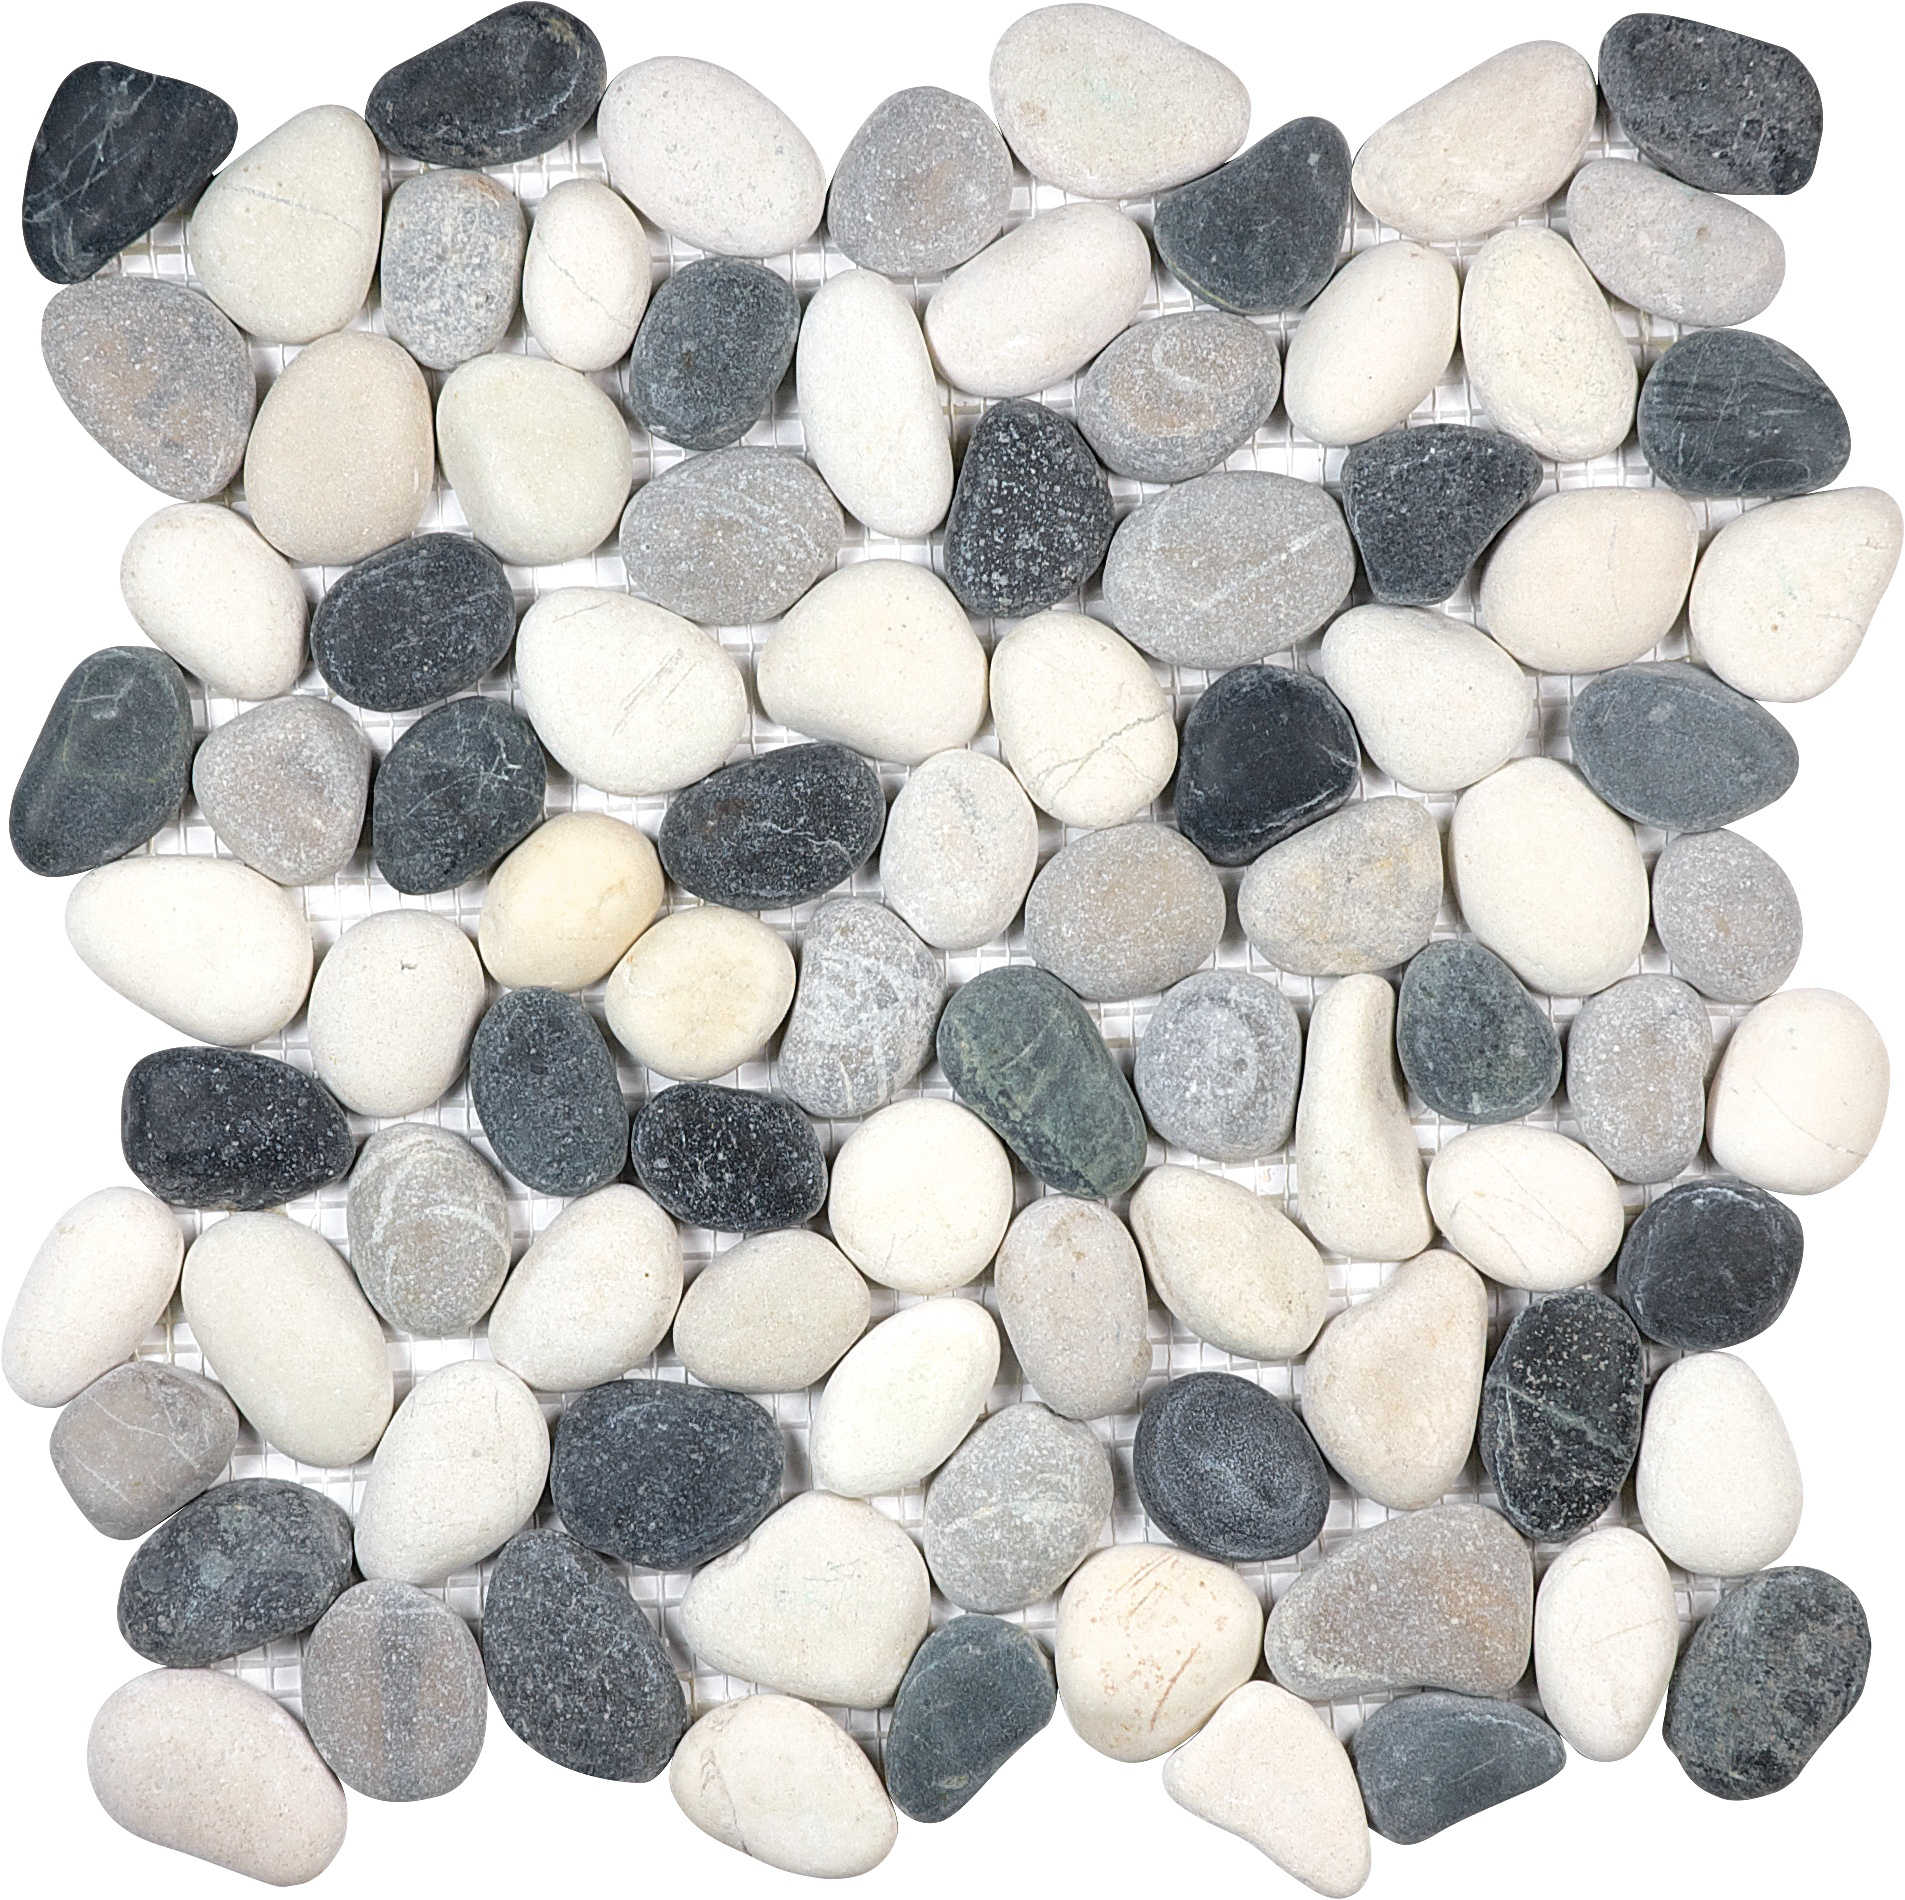 pebble tranquil cool natural pebble pattern natural stone mosaic from zen anatolia collection distributed by surface group international matte finish straight edge edge mesh shape